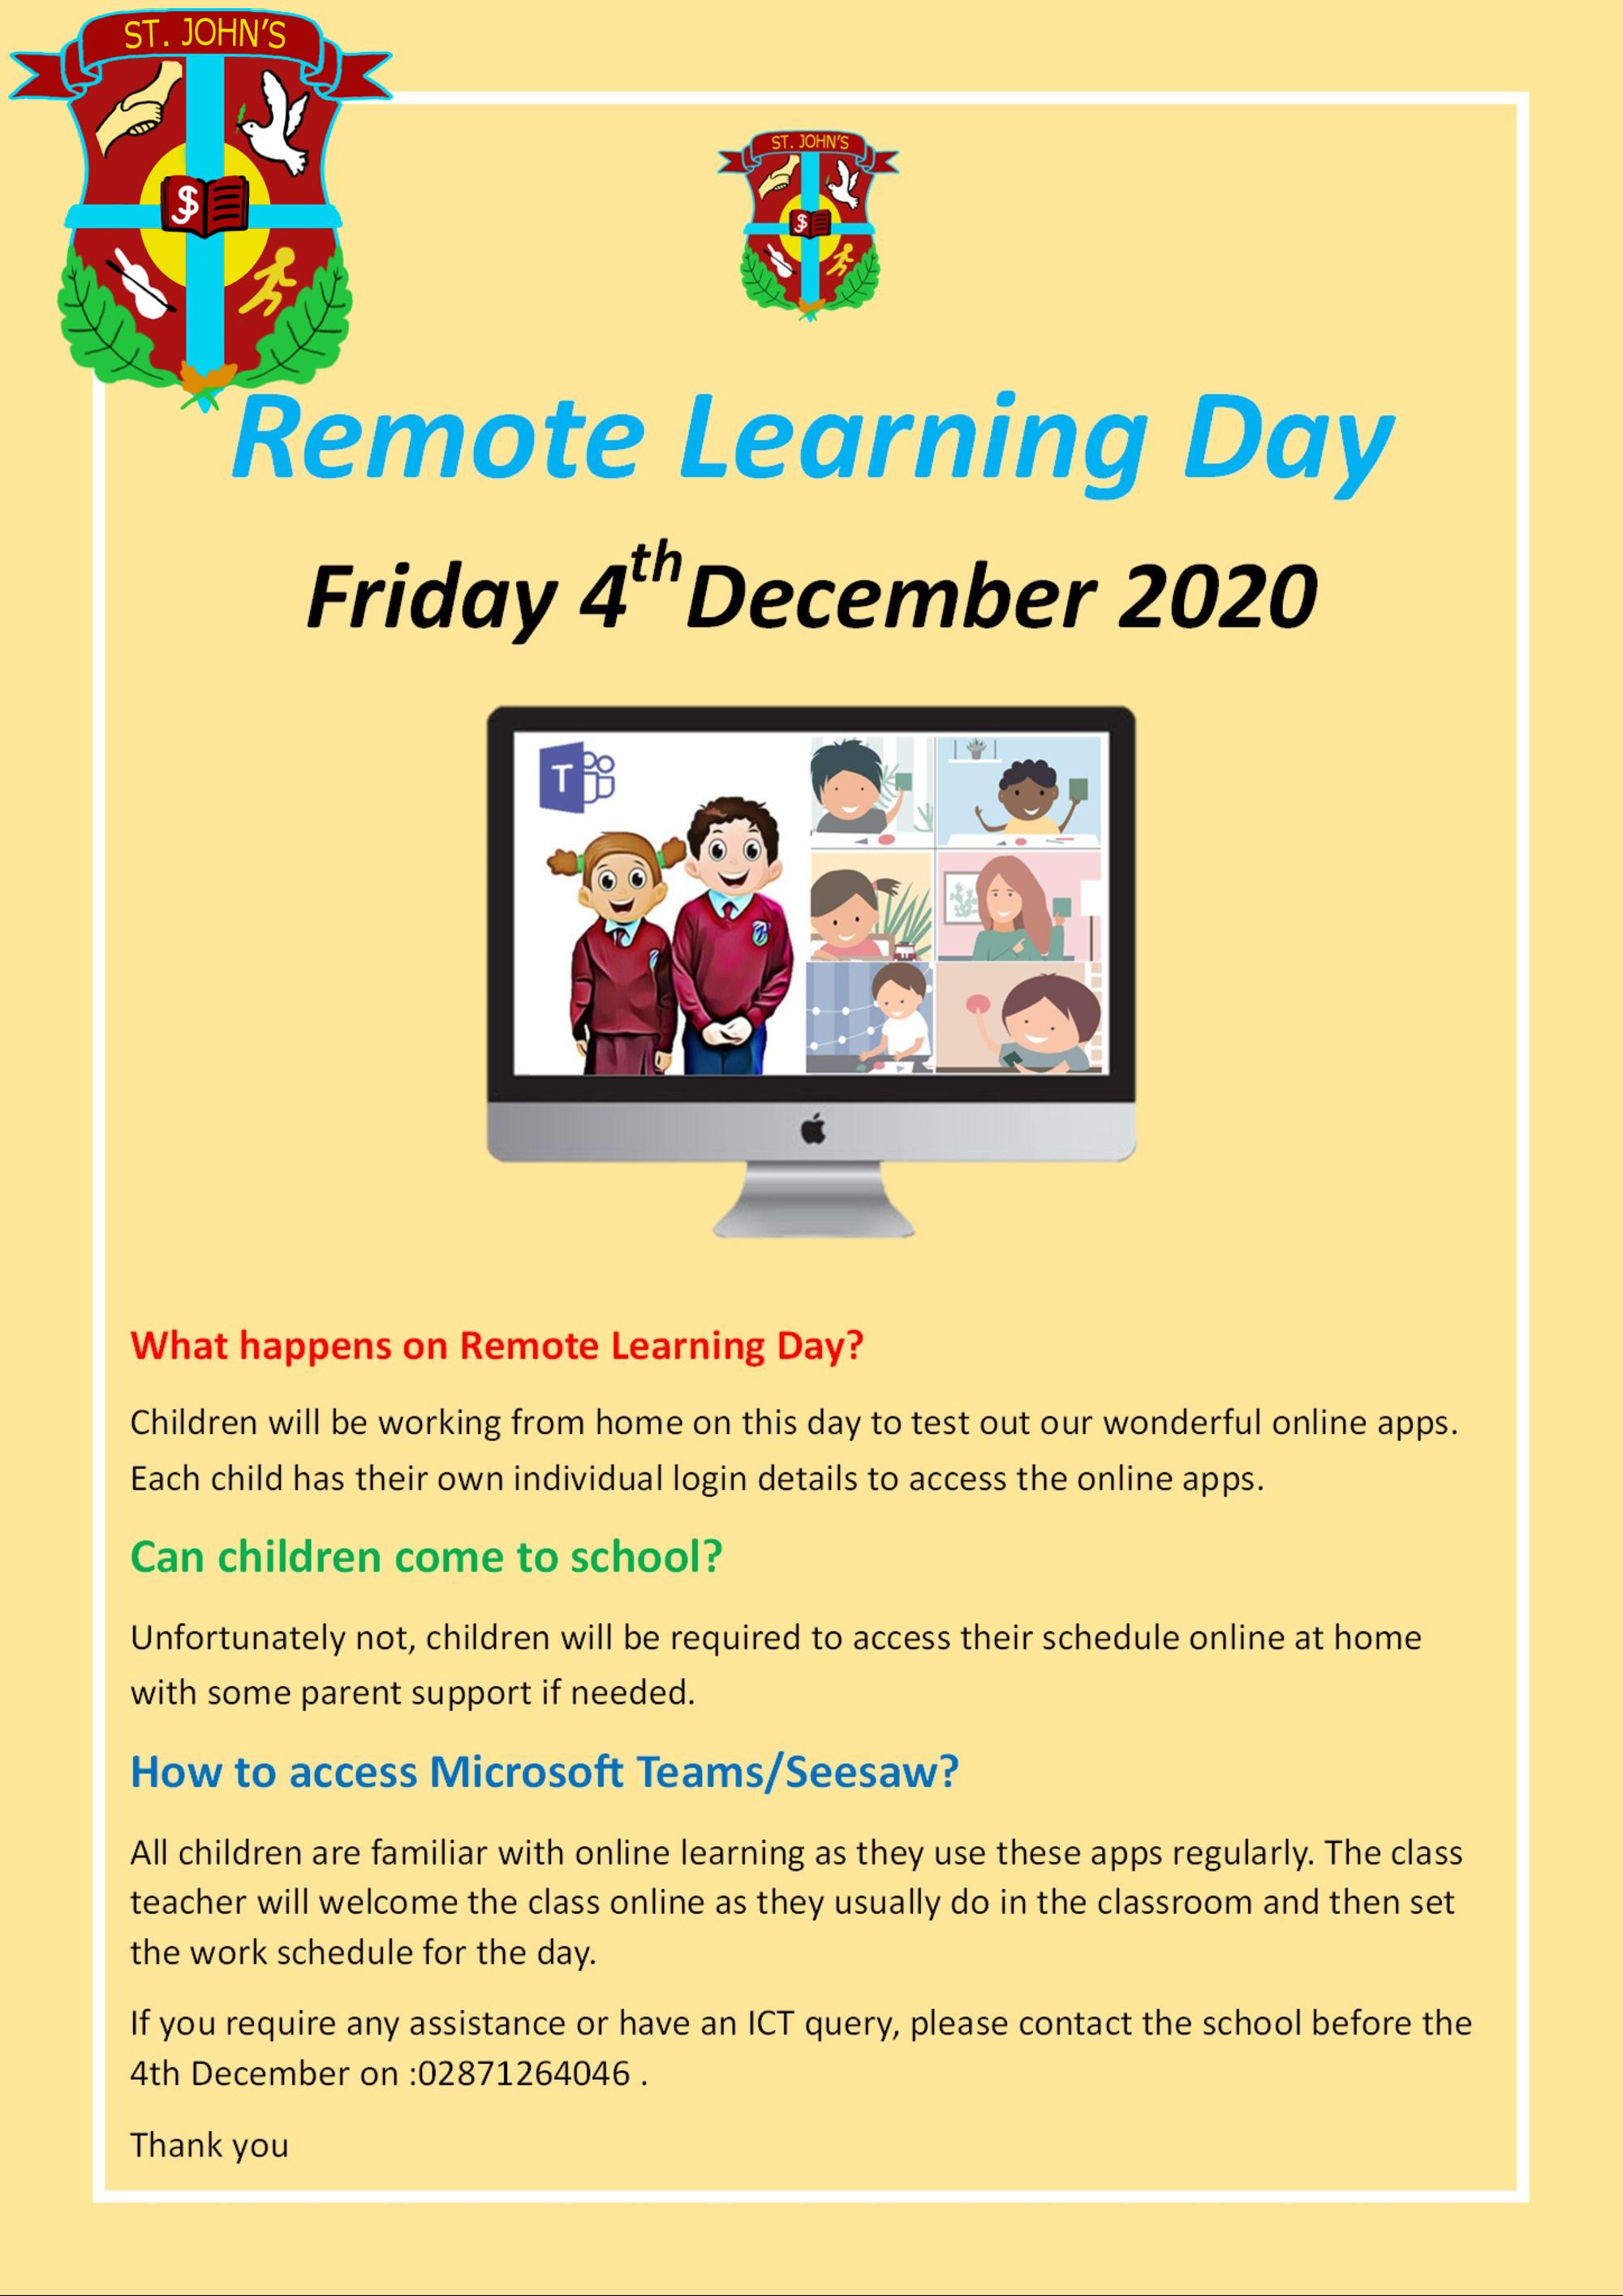 Remote Learning Day 2020